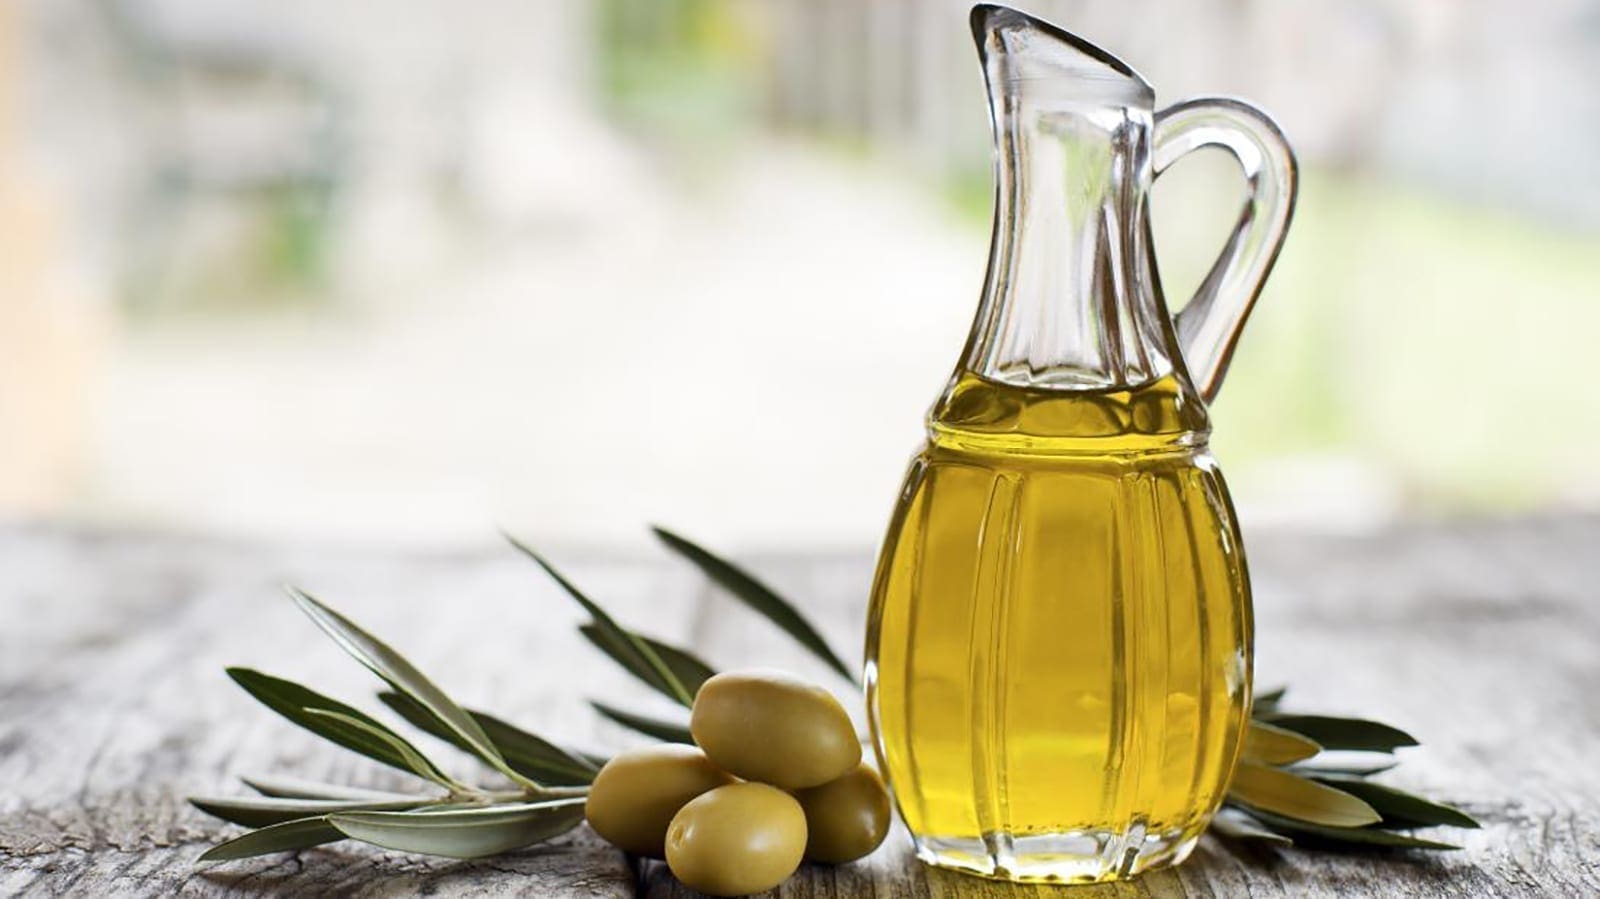 Tunisian olive oil producer CHO company clinches US$26m financing, management support from IFC